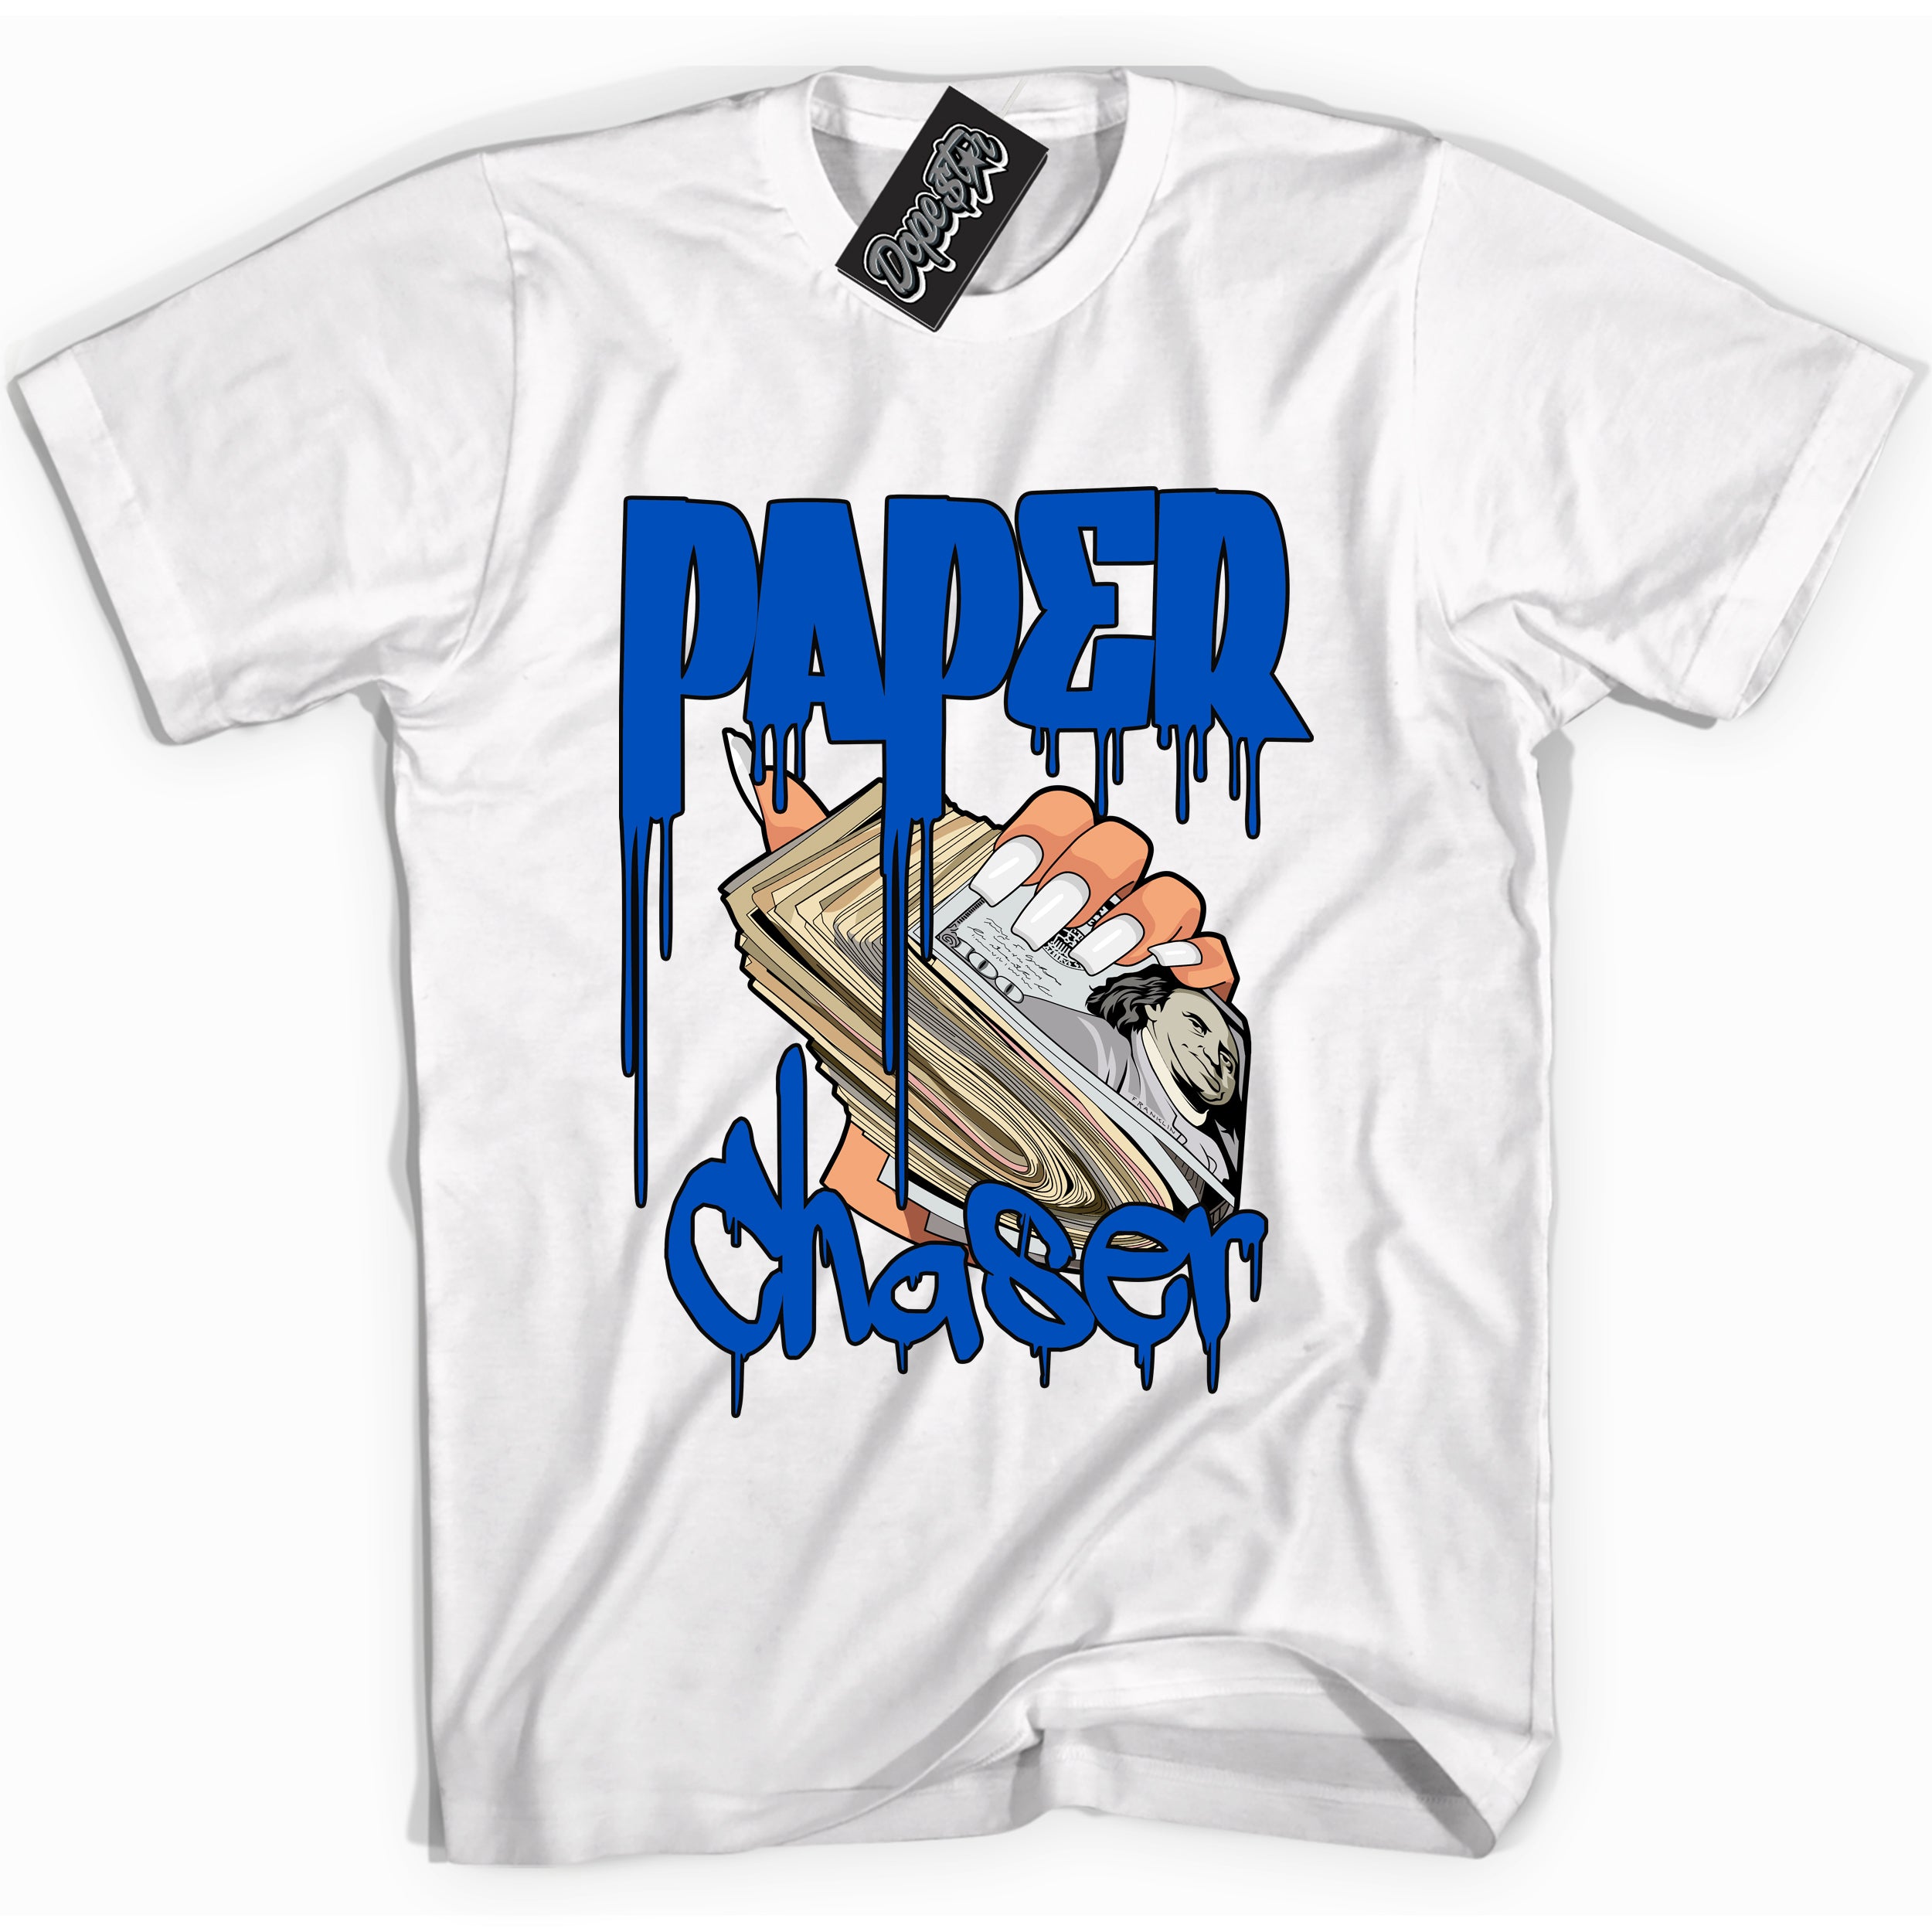 Cool Black graphic tee with "Paper Chaser" design, that perfectly matches Royal Reimagined 1s sneakers 